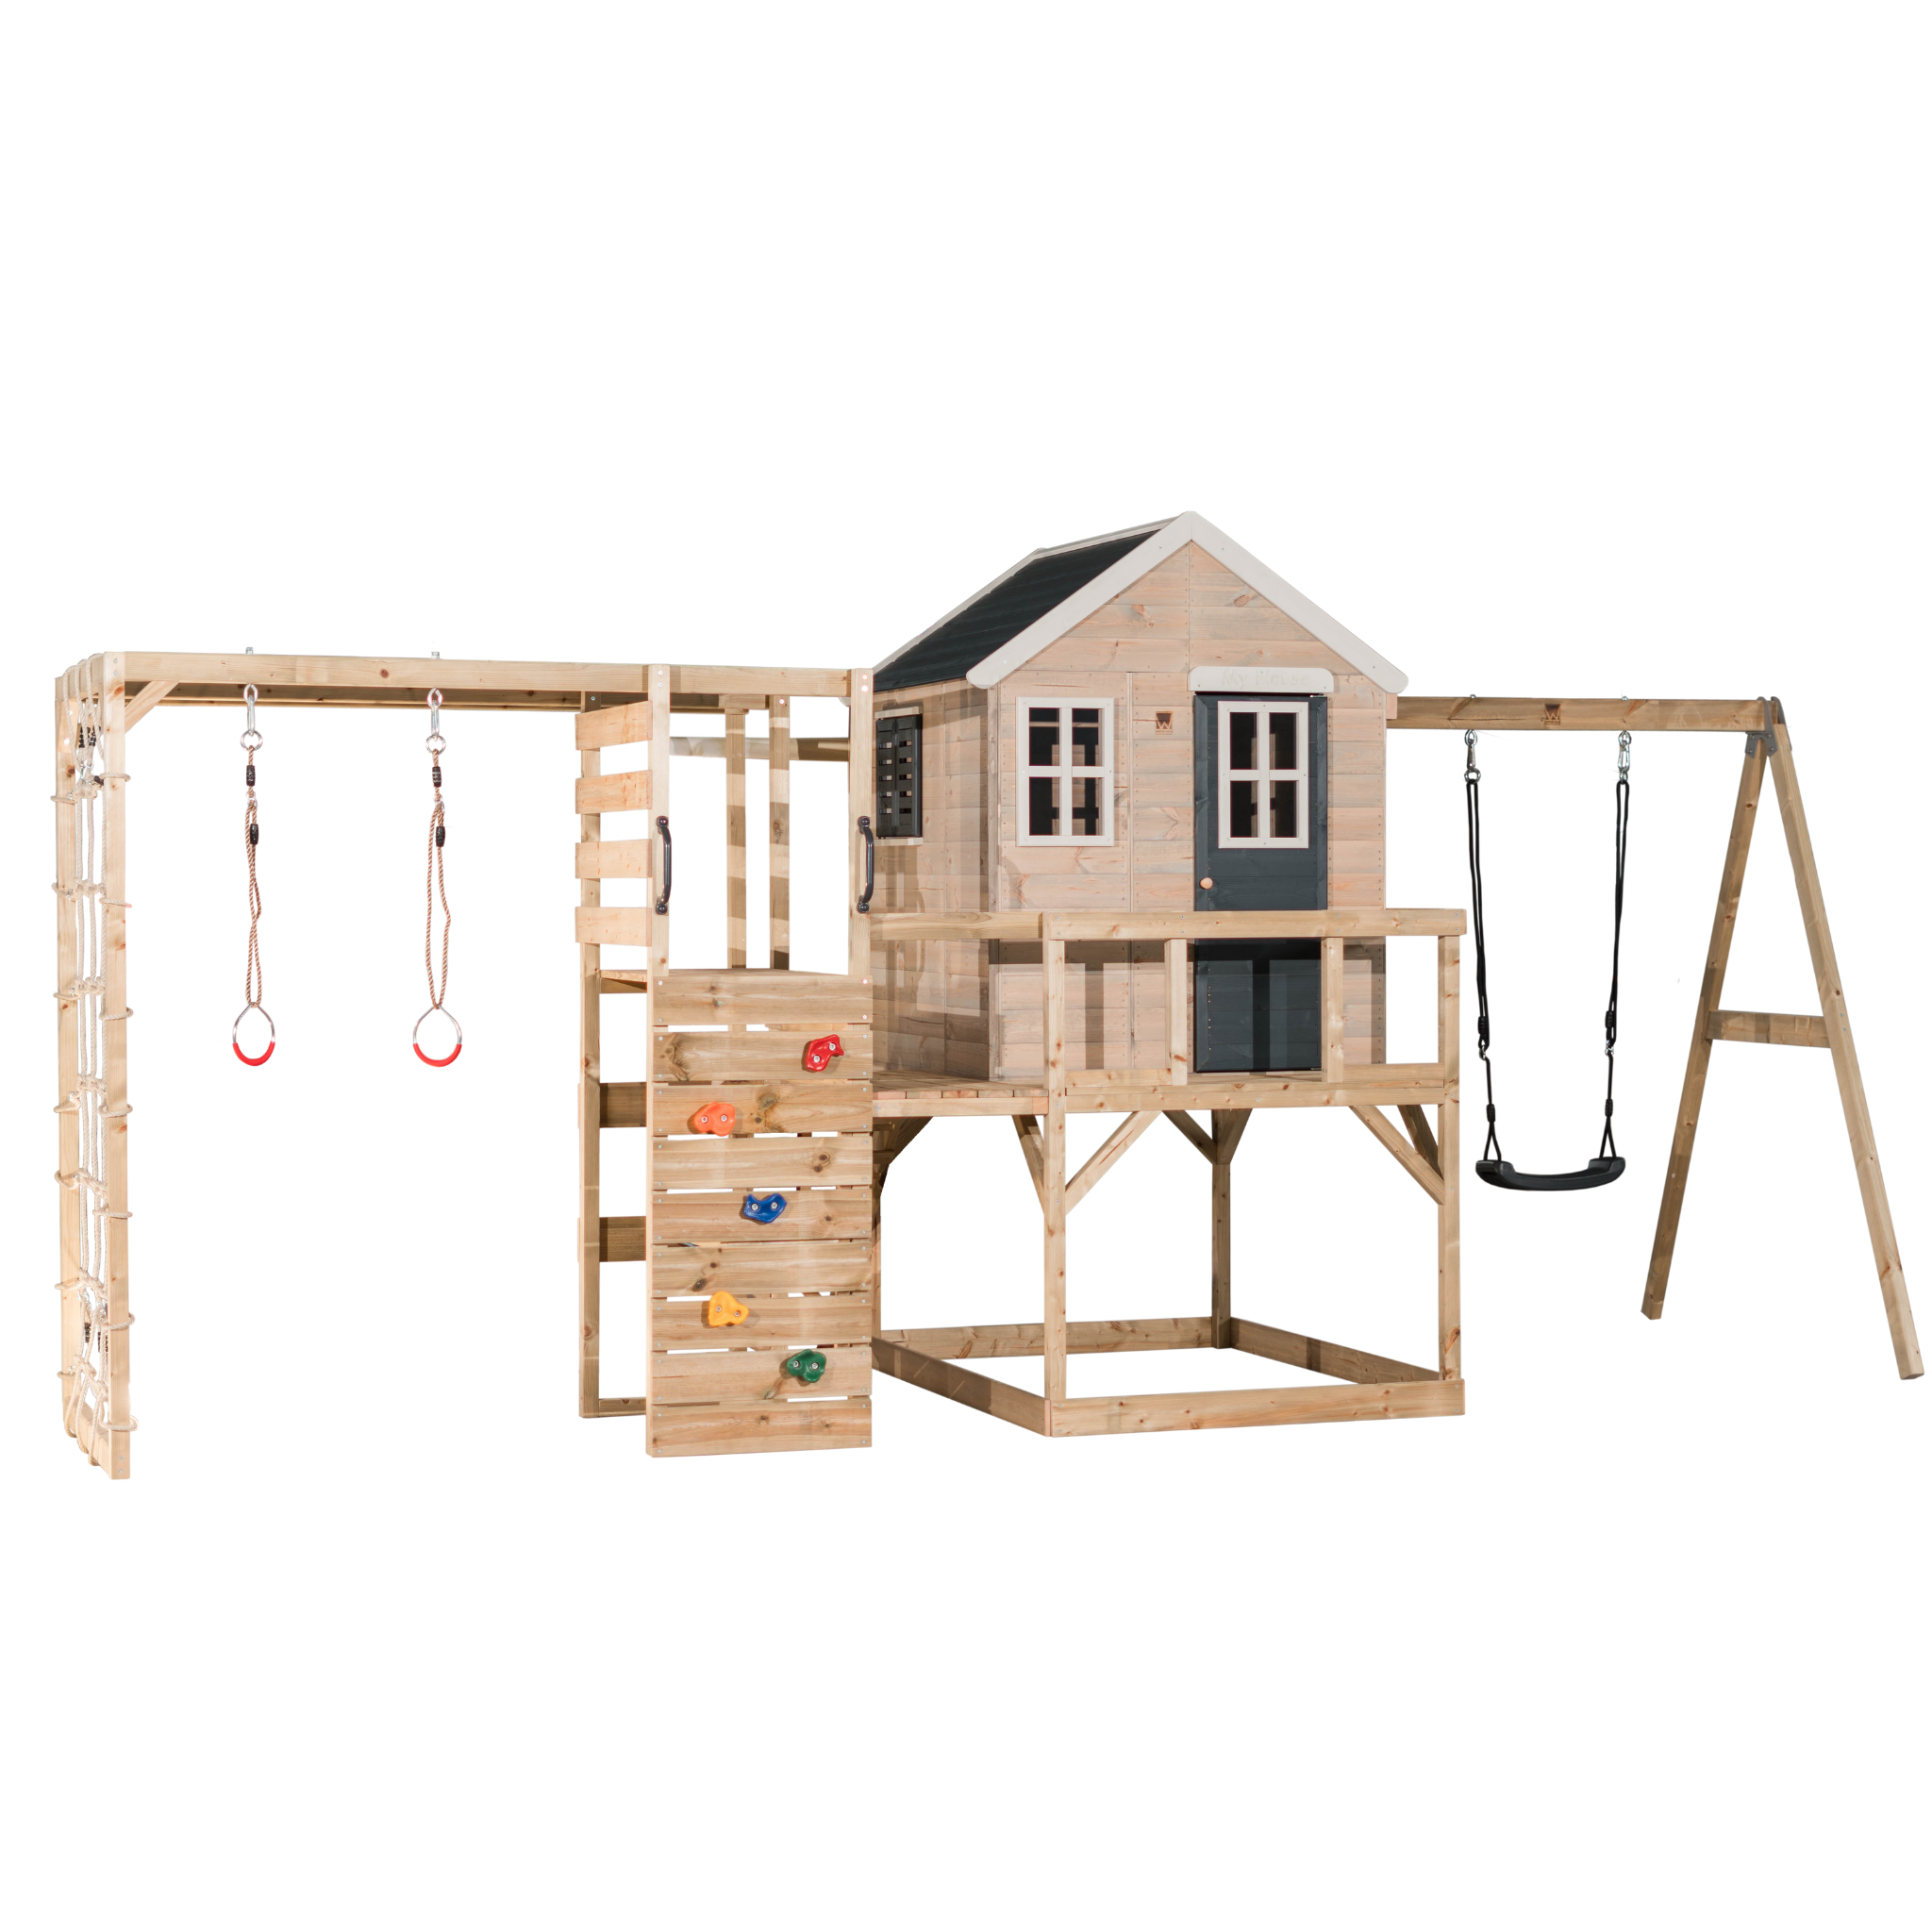 M23-G My Lodge with Platform and Single Swing + Gym Attachment